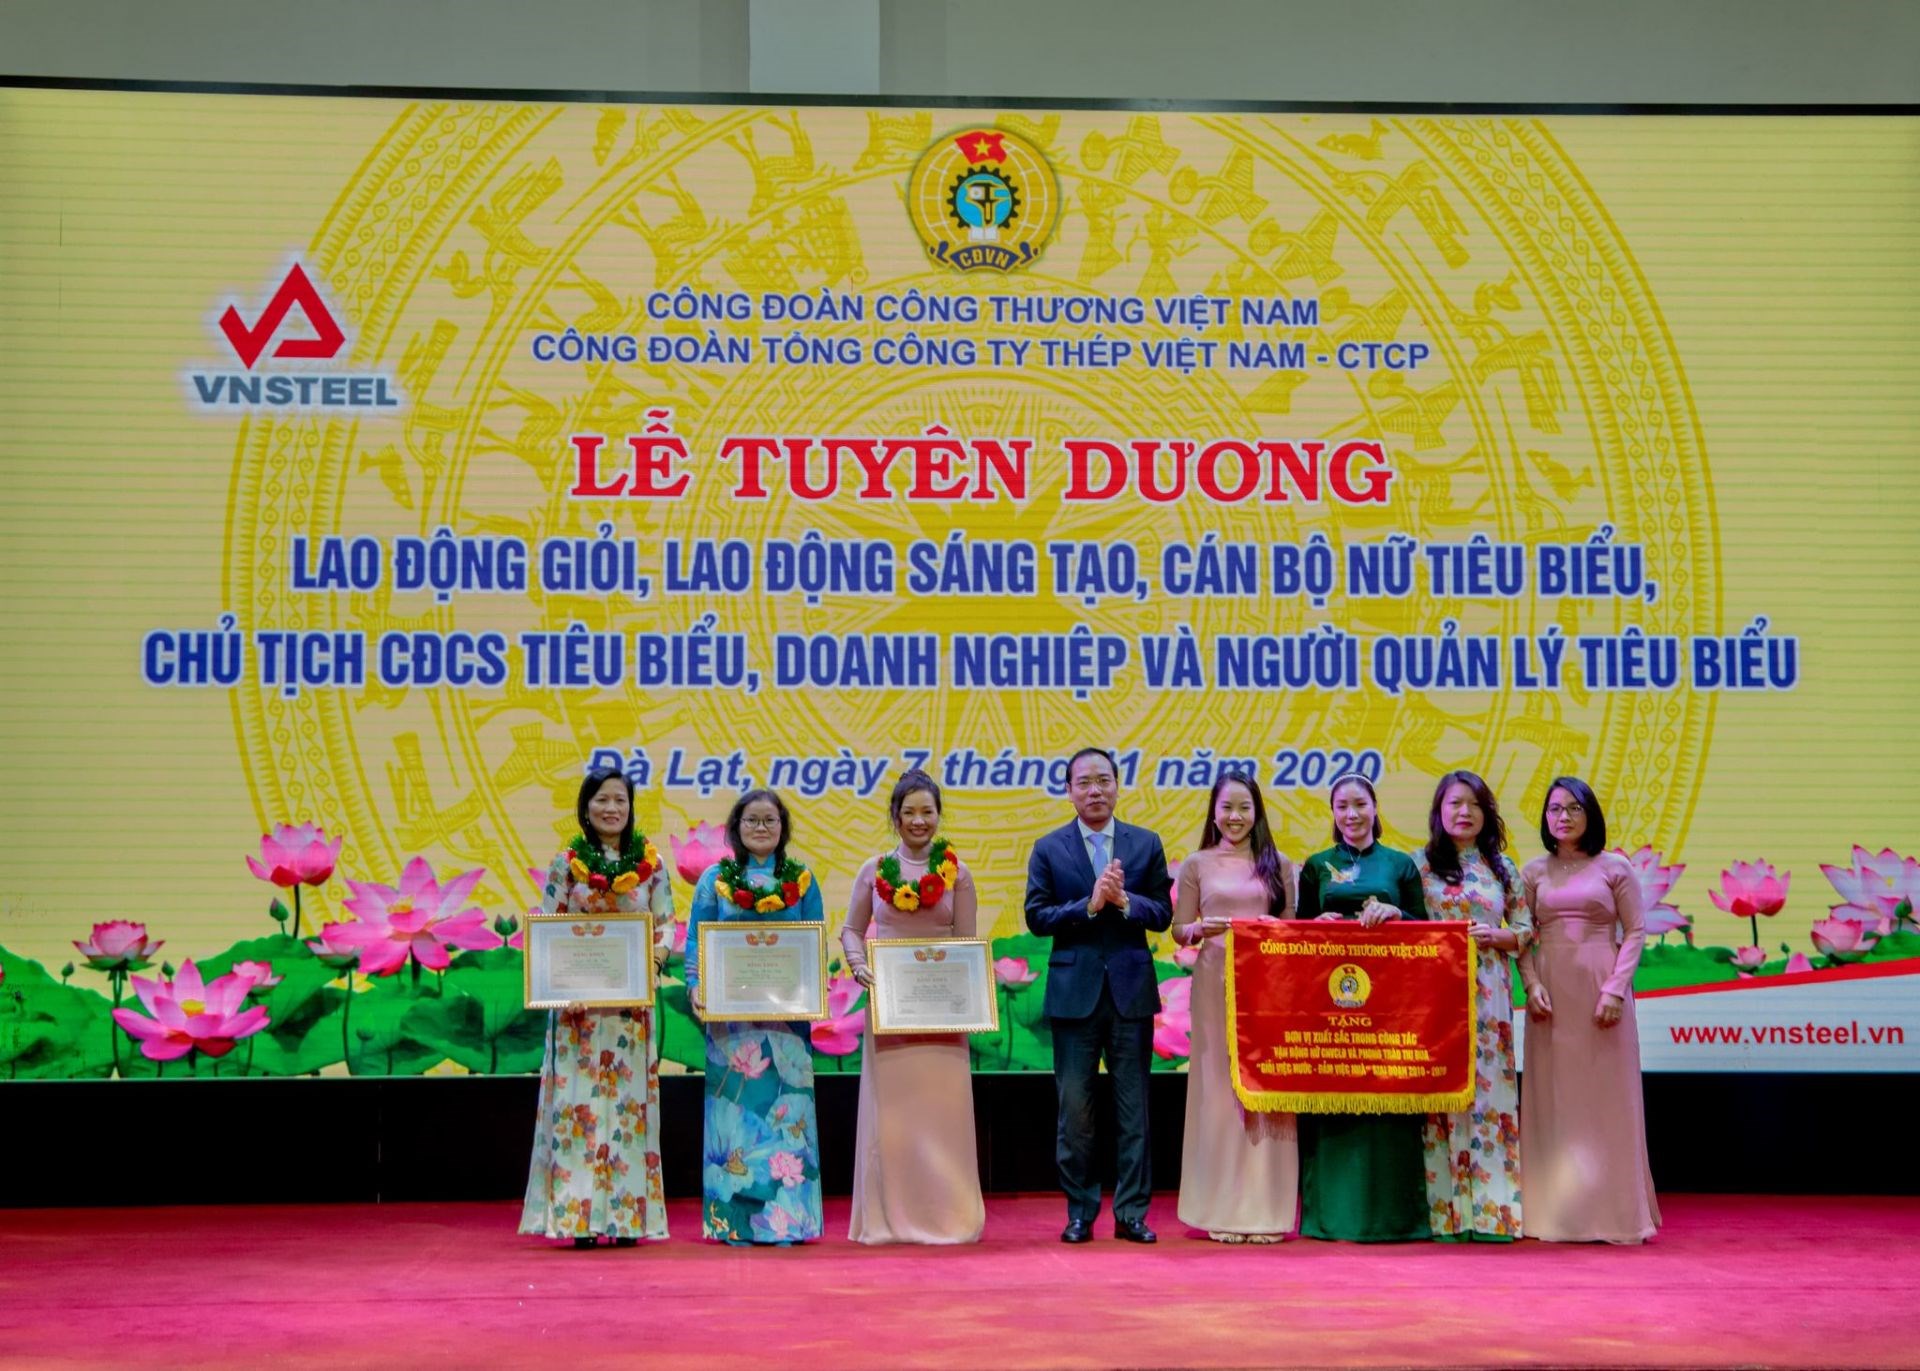 The Vietnam Industry and Trade Union presented Emulation Flags to the Women's Trade Union Division of the Corporation and awarded Certificates of Merit to 3 individuals with excellent achievements in mobilizing female employees and the emulation movement 